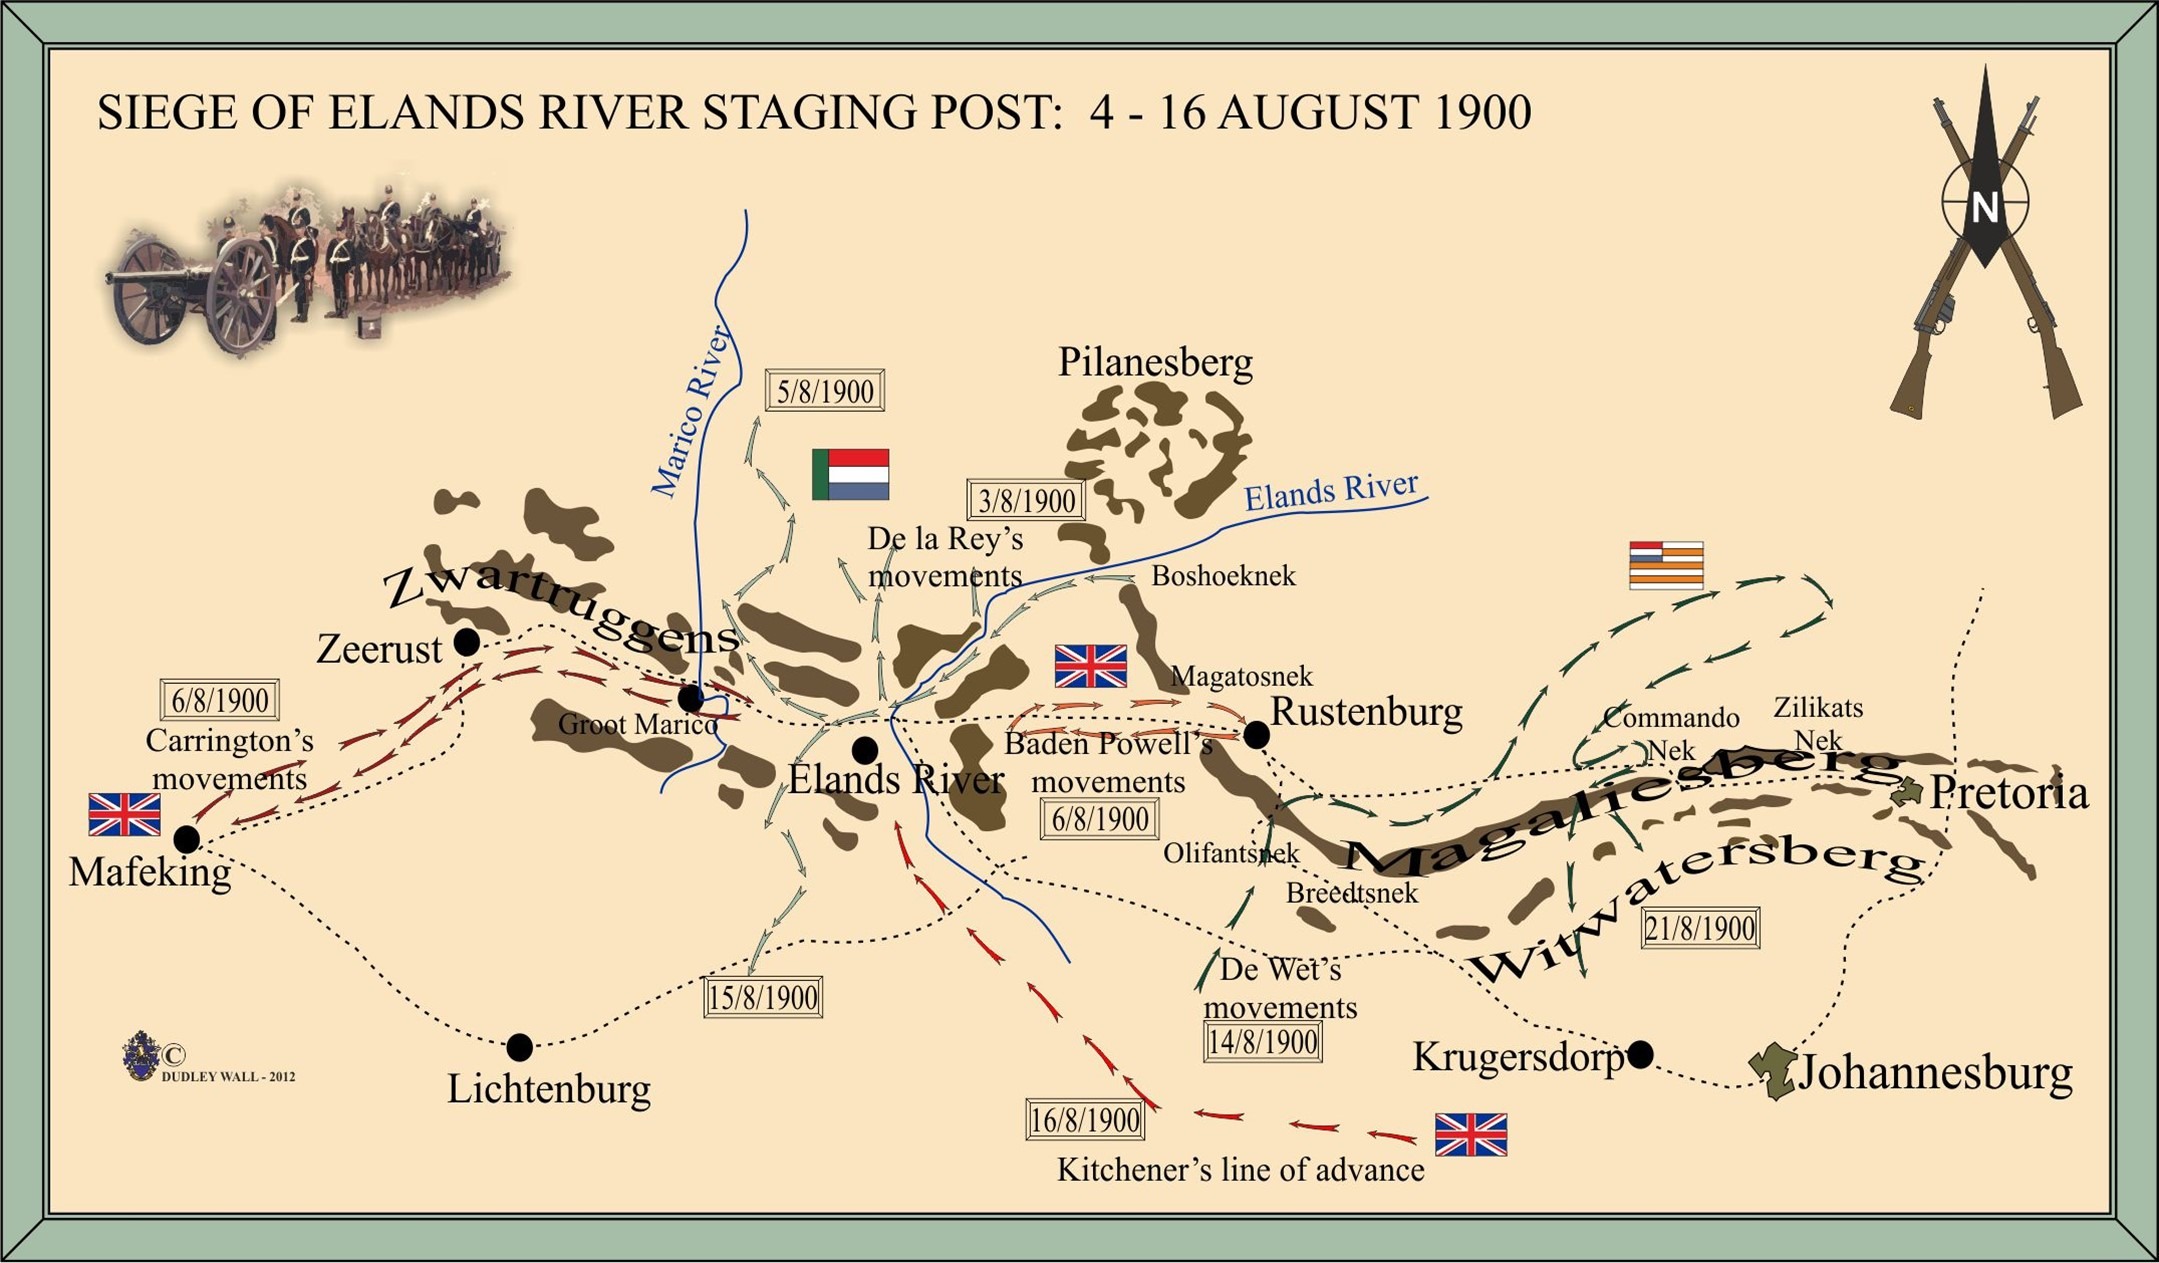 British and Boer forces’ movements in the northwestern Transvaal in August 1900. 
(Map Colonel Dudley Wall)